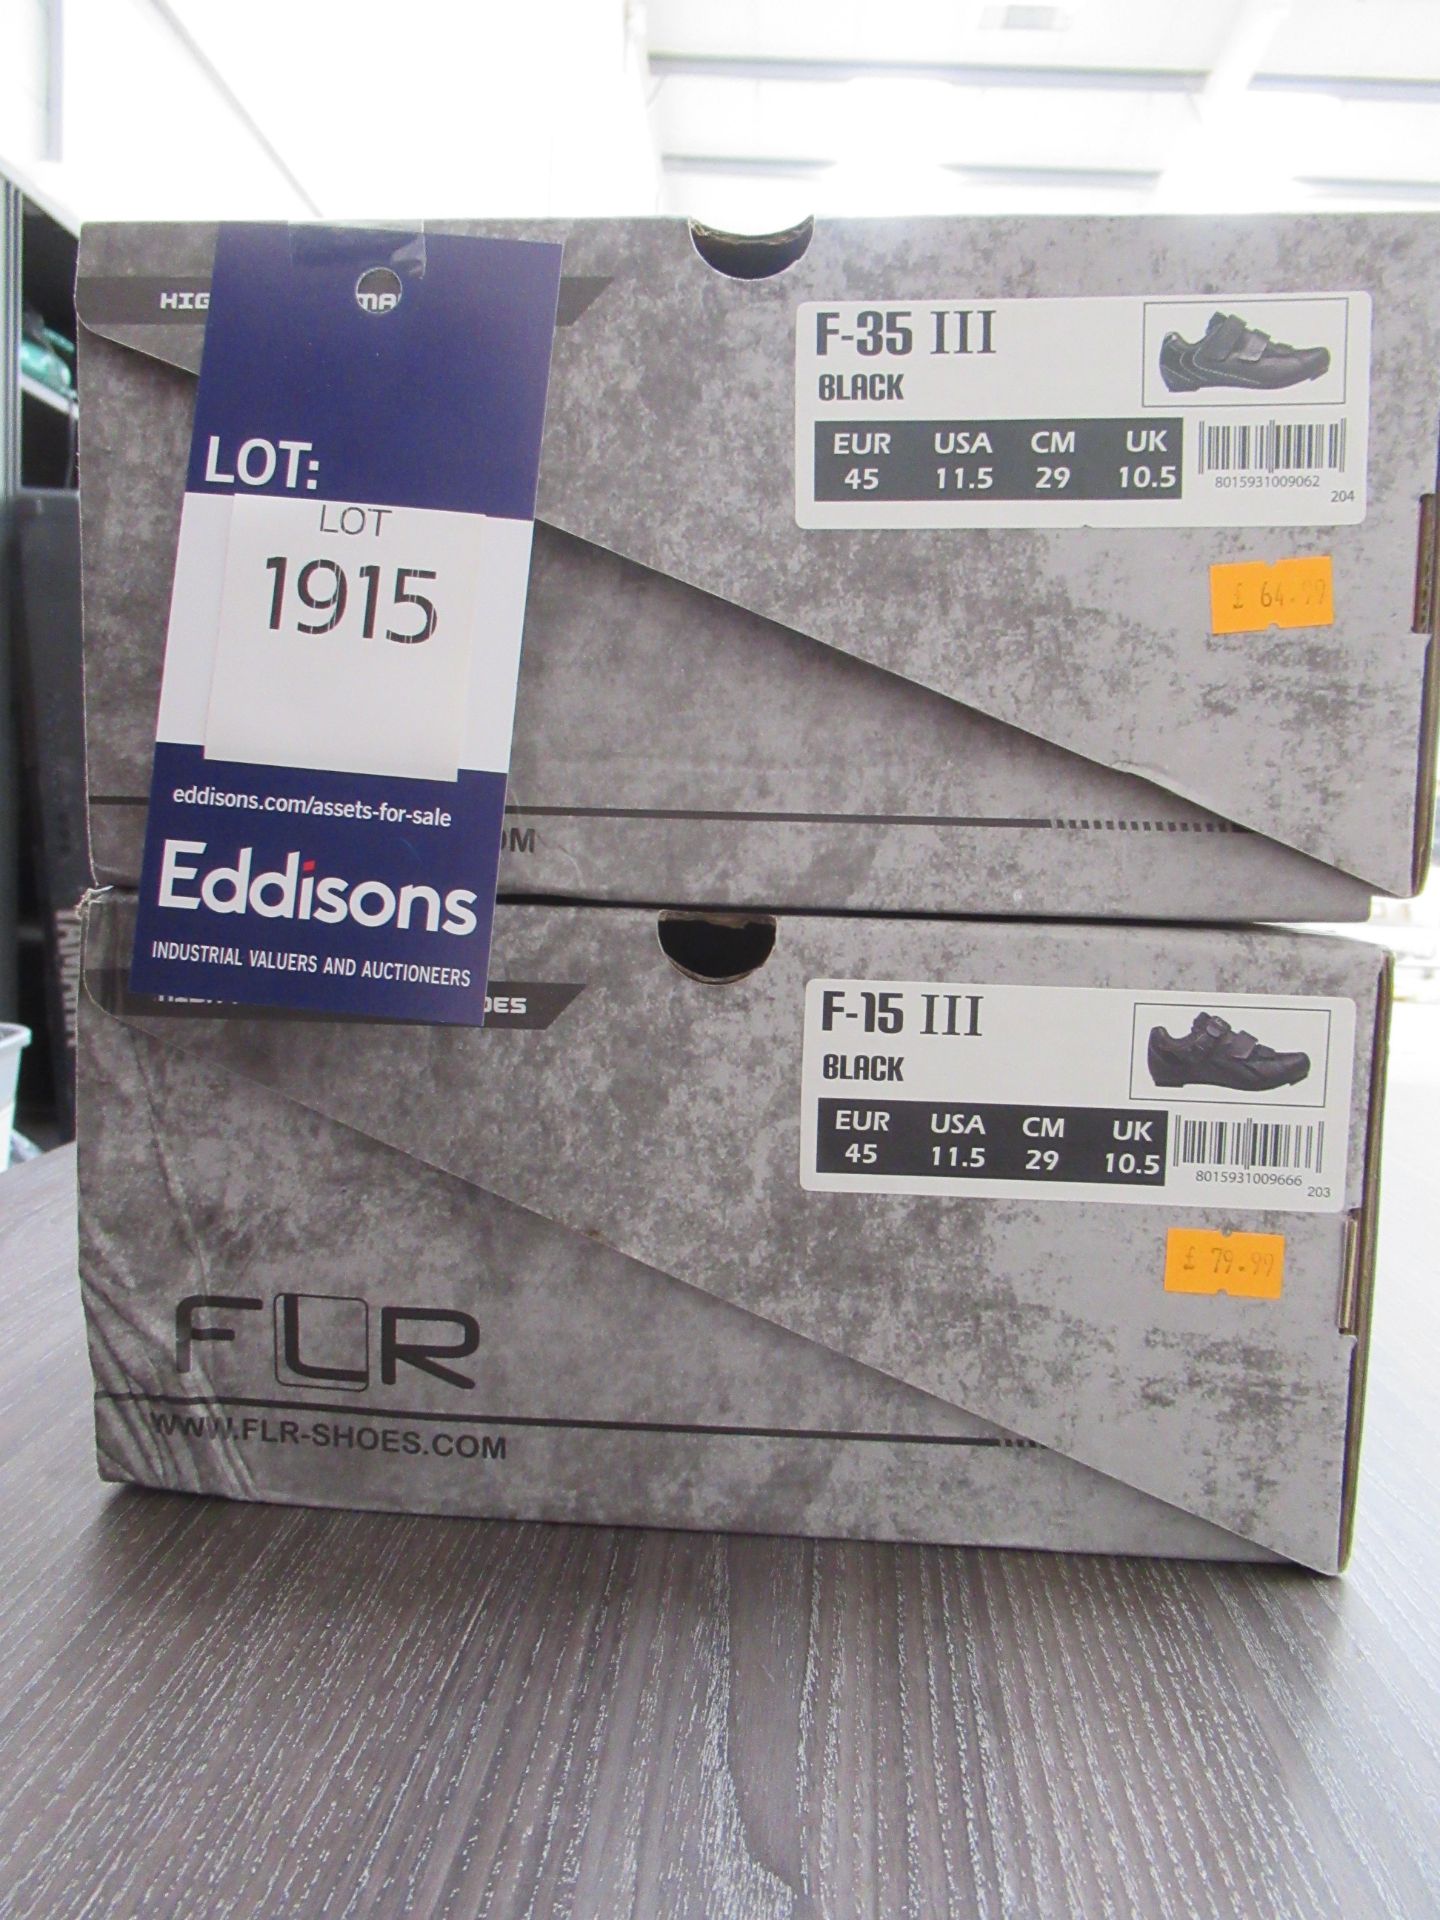 2 x Pairs of FLR cycling shoes - 1 x F-35 III boxed EU size 45 (RRP££64.99) and 1 x F-15 III boxed E